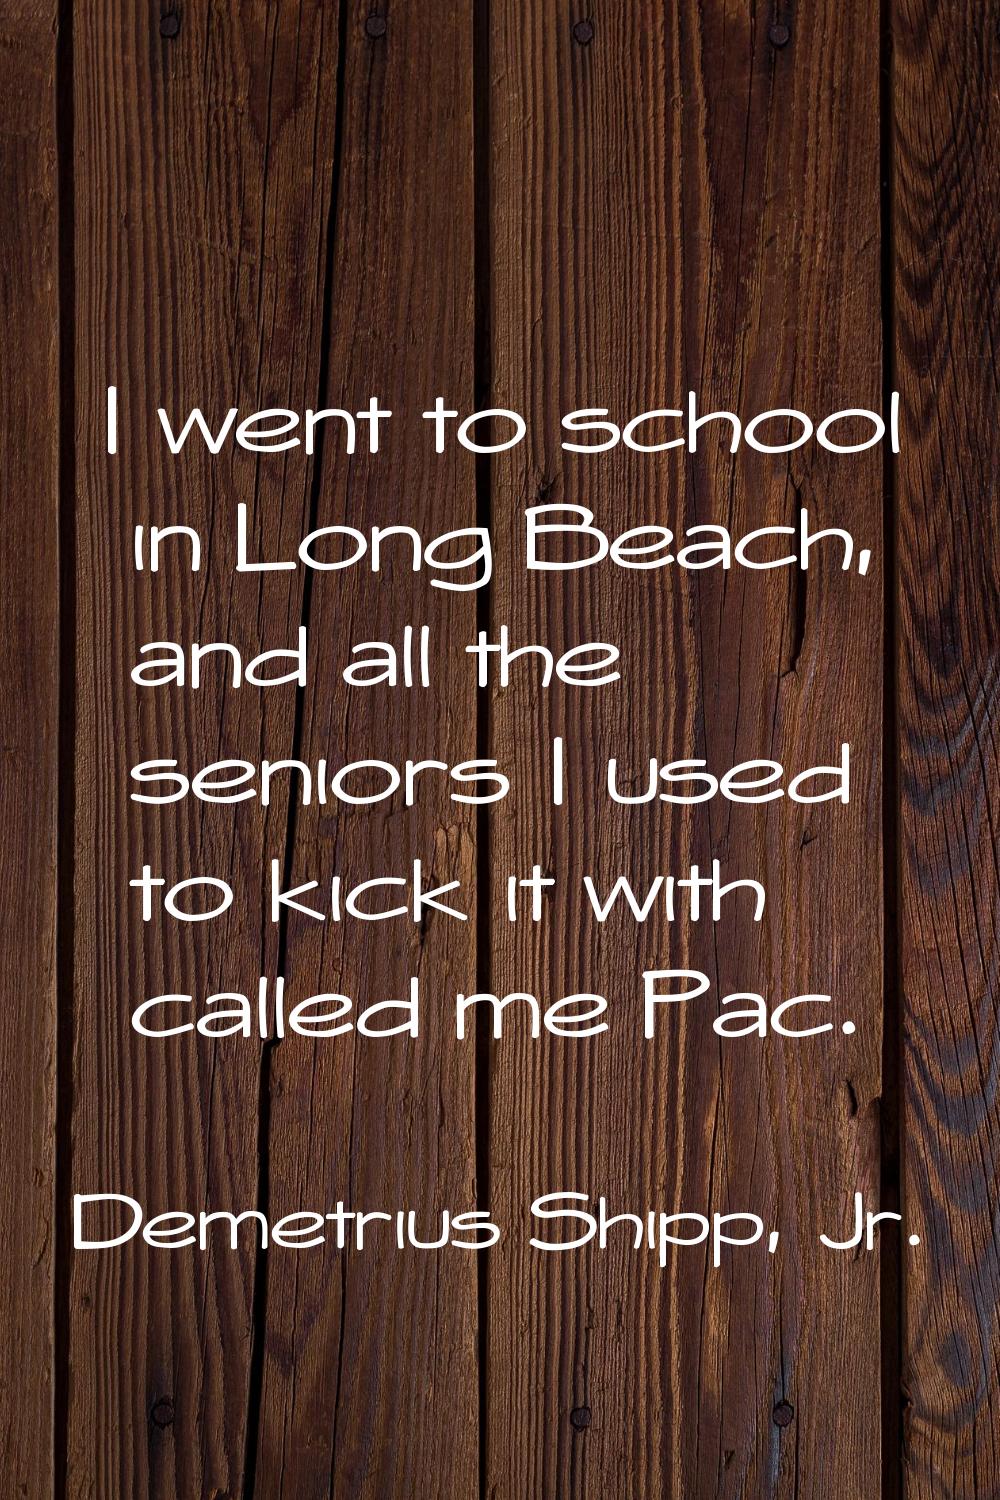 I went to school in Long Beach, and all the seniors I used to kick it with called me Pac.